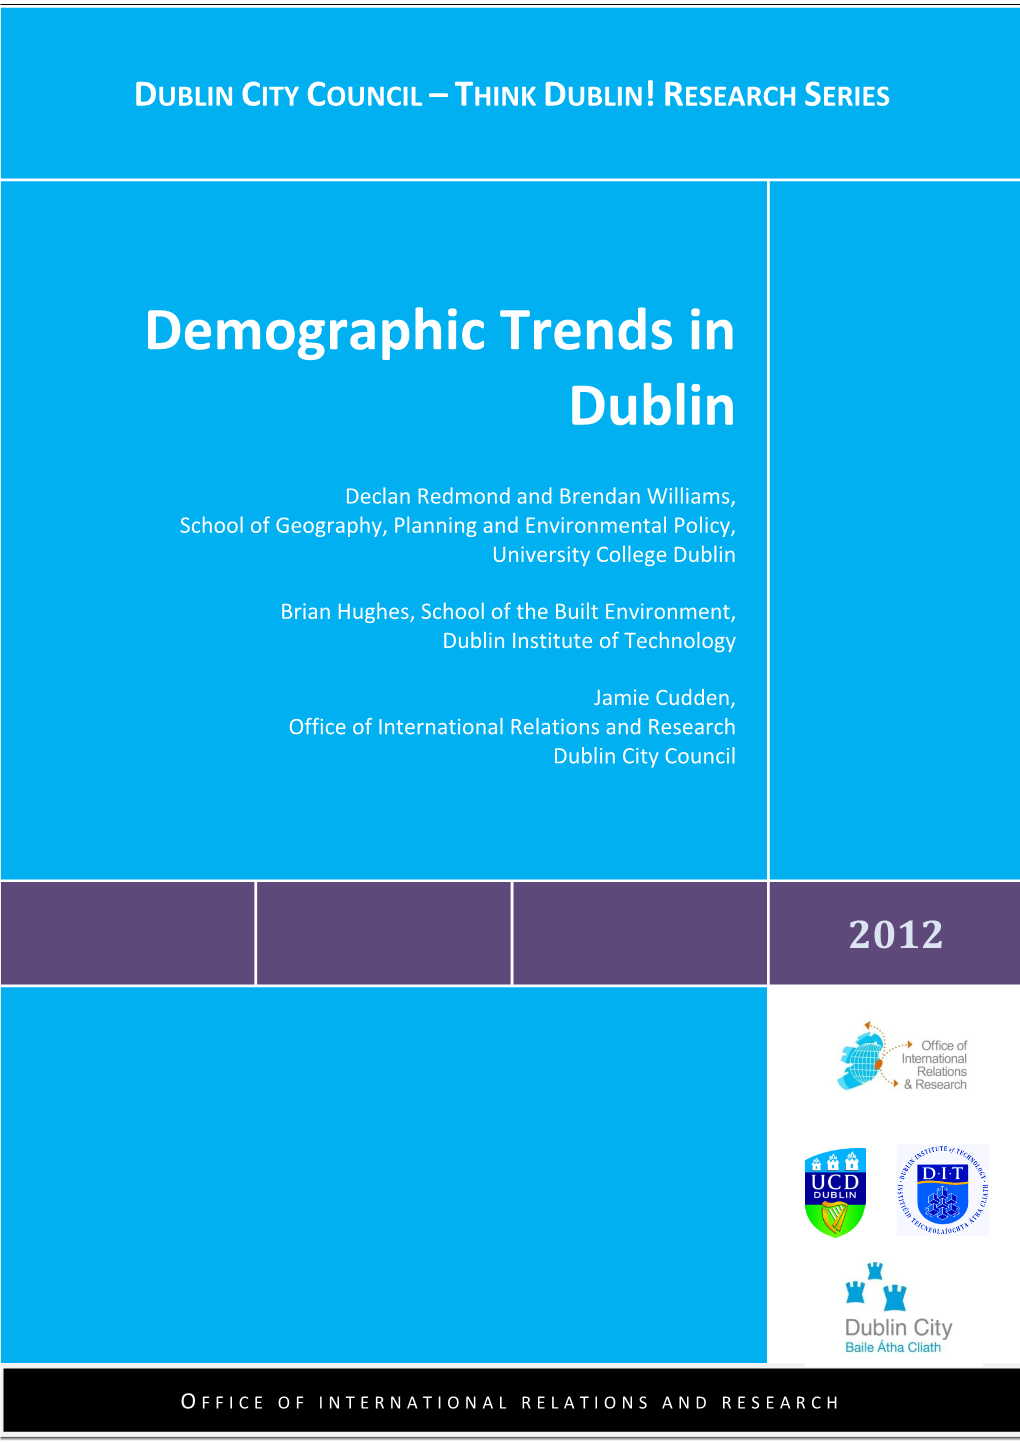 Demographic Trends in Dublin Over the Past Two Decades